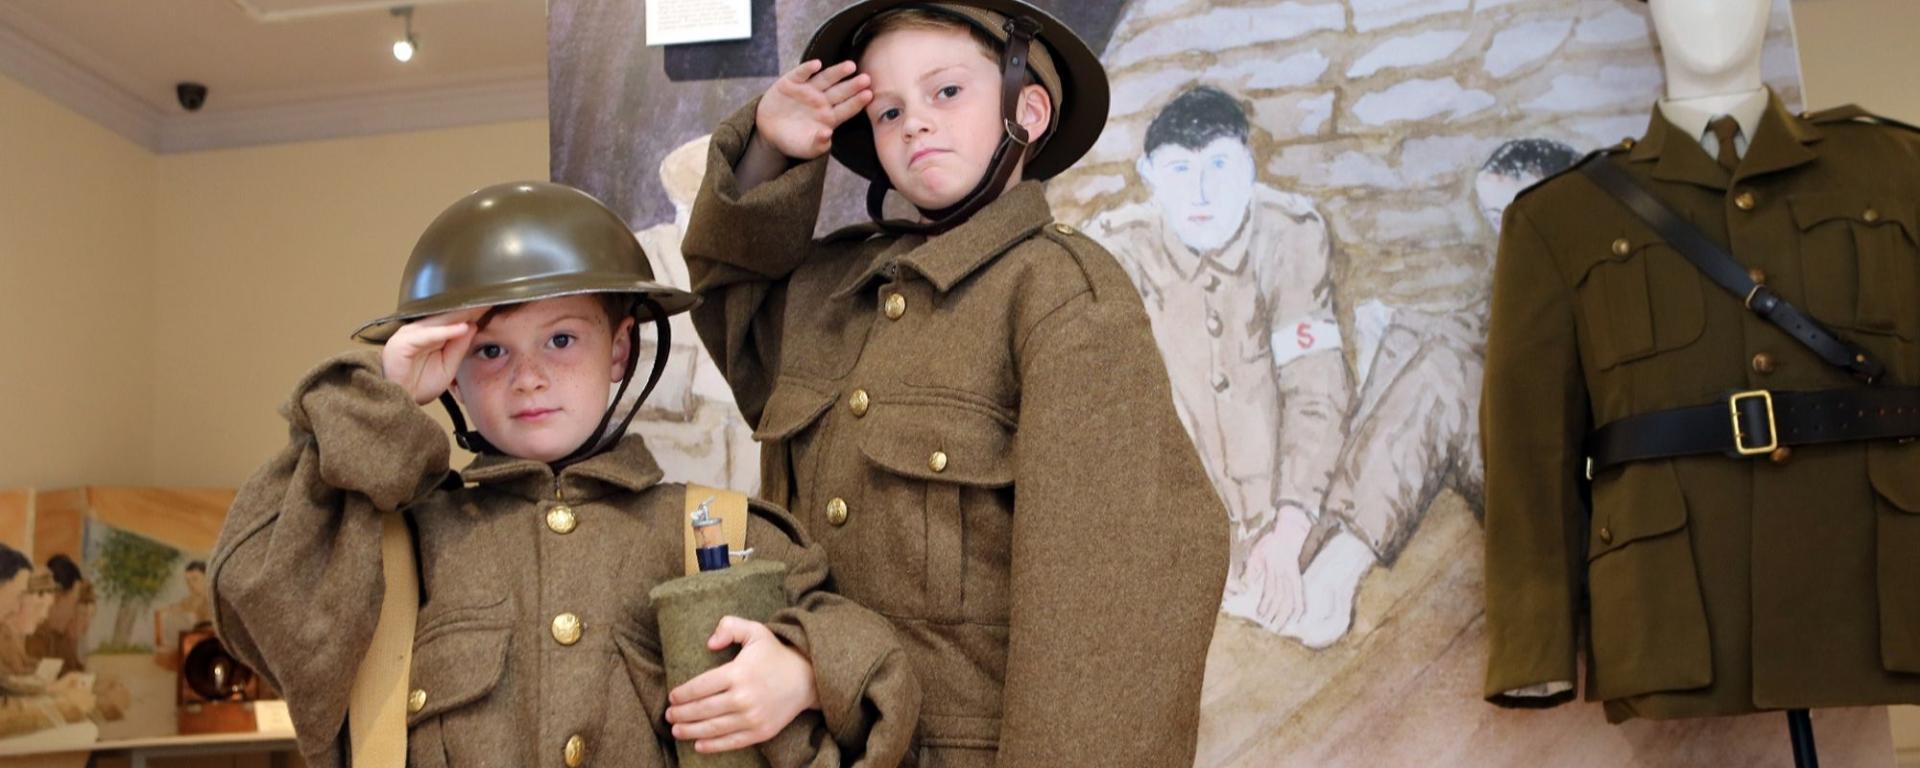 Two Boys Dressed As Soldiers